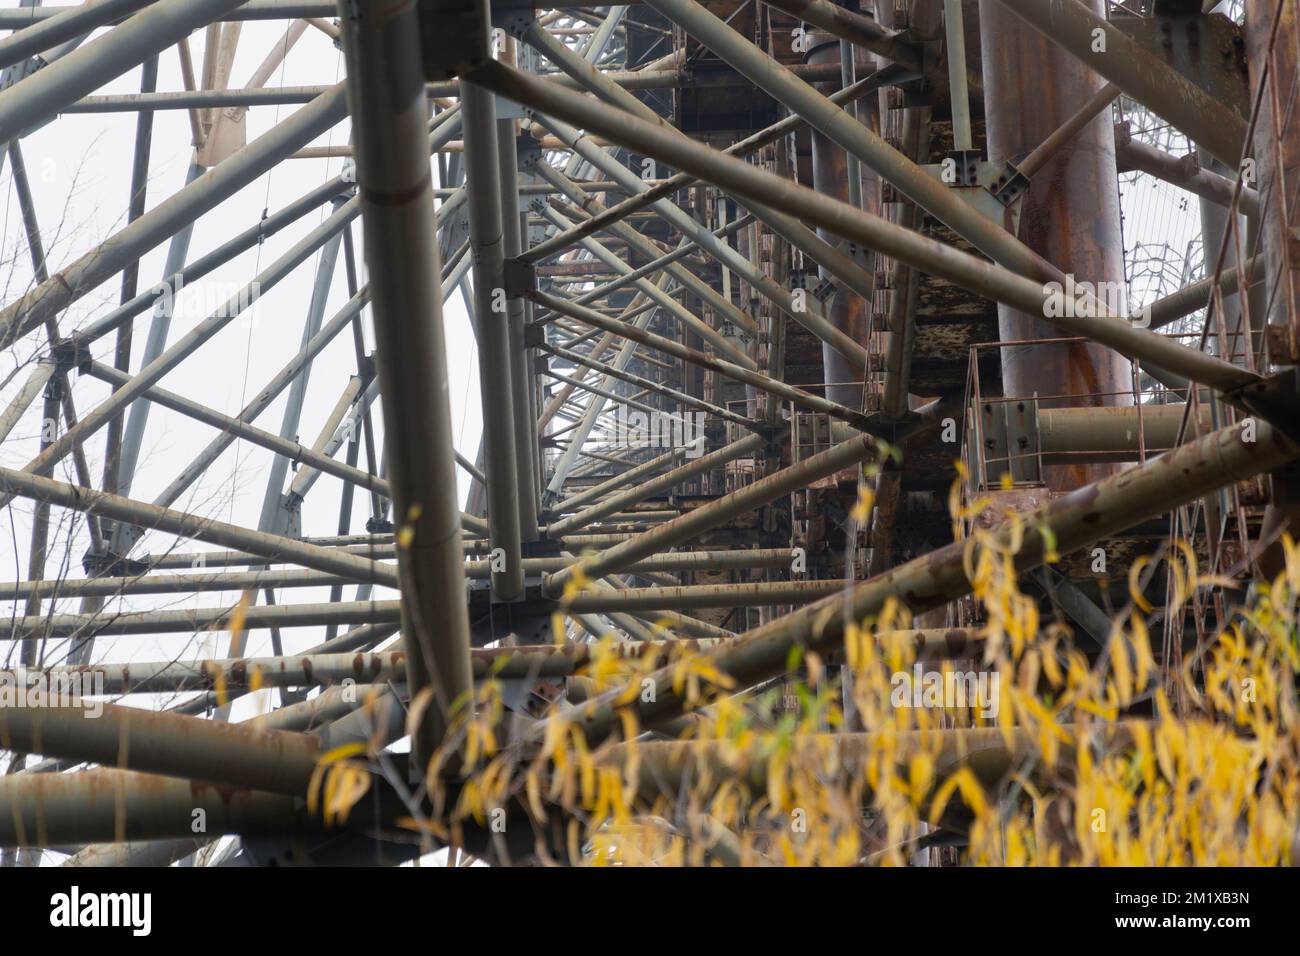 air defense radar system at chernobyl radiation exclusion zone viewed from the ground Stock Photo